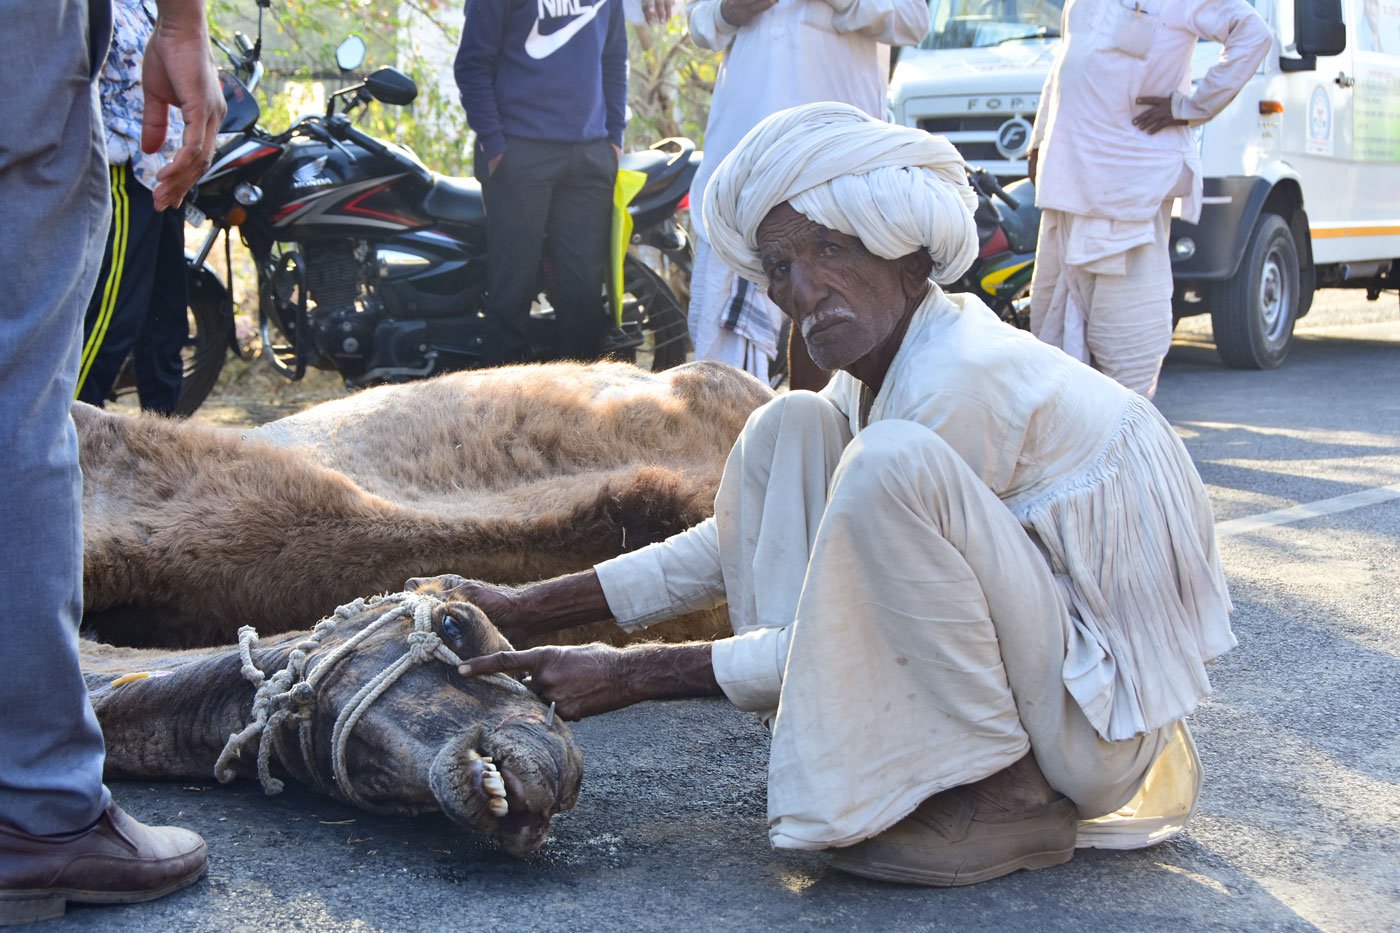 A herder from the Rabari community takes care of a camel who collapsed on the outskirts of Amravati town within hours of its release